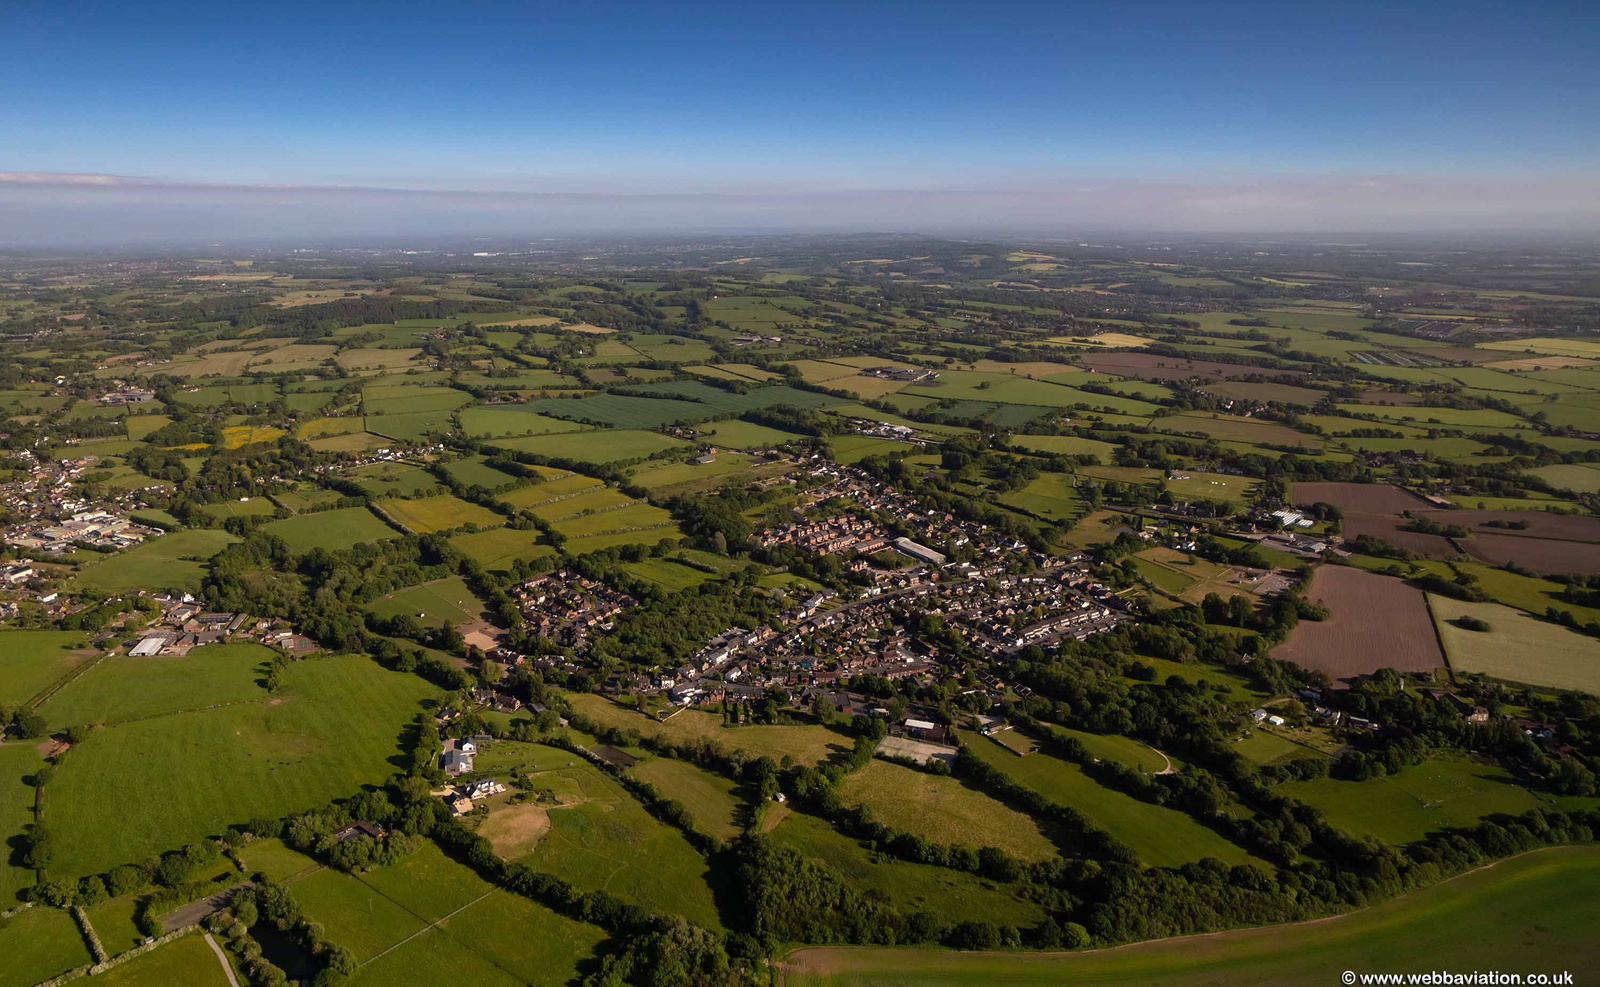 Mawdesley Lancashire from the air